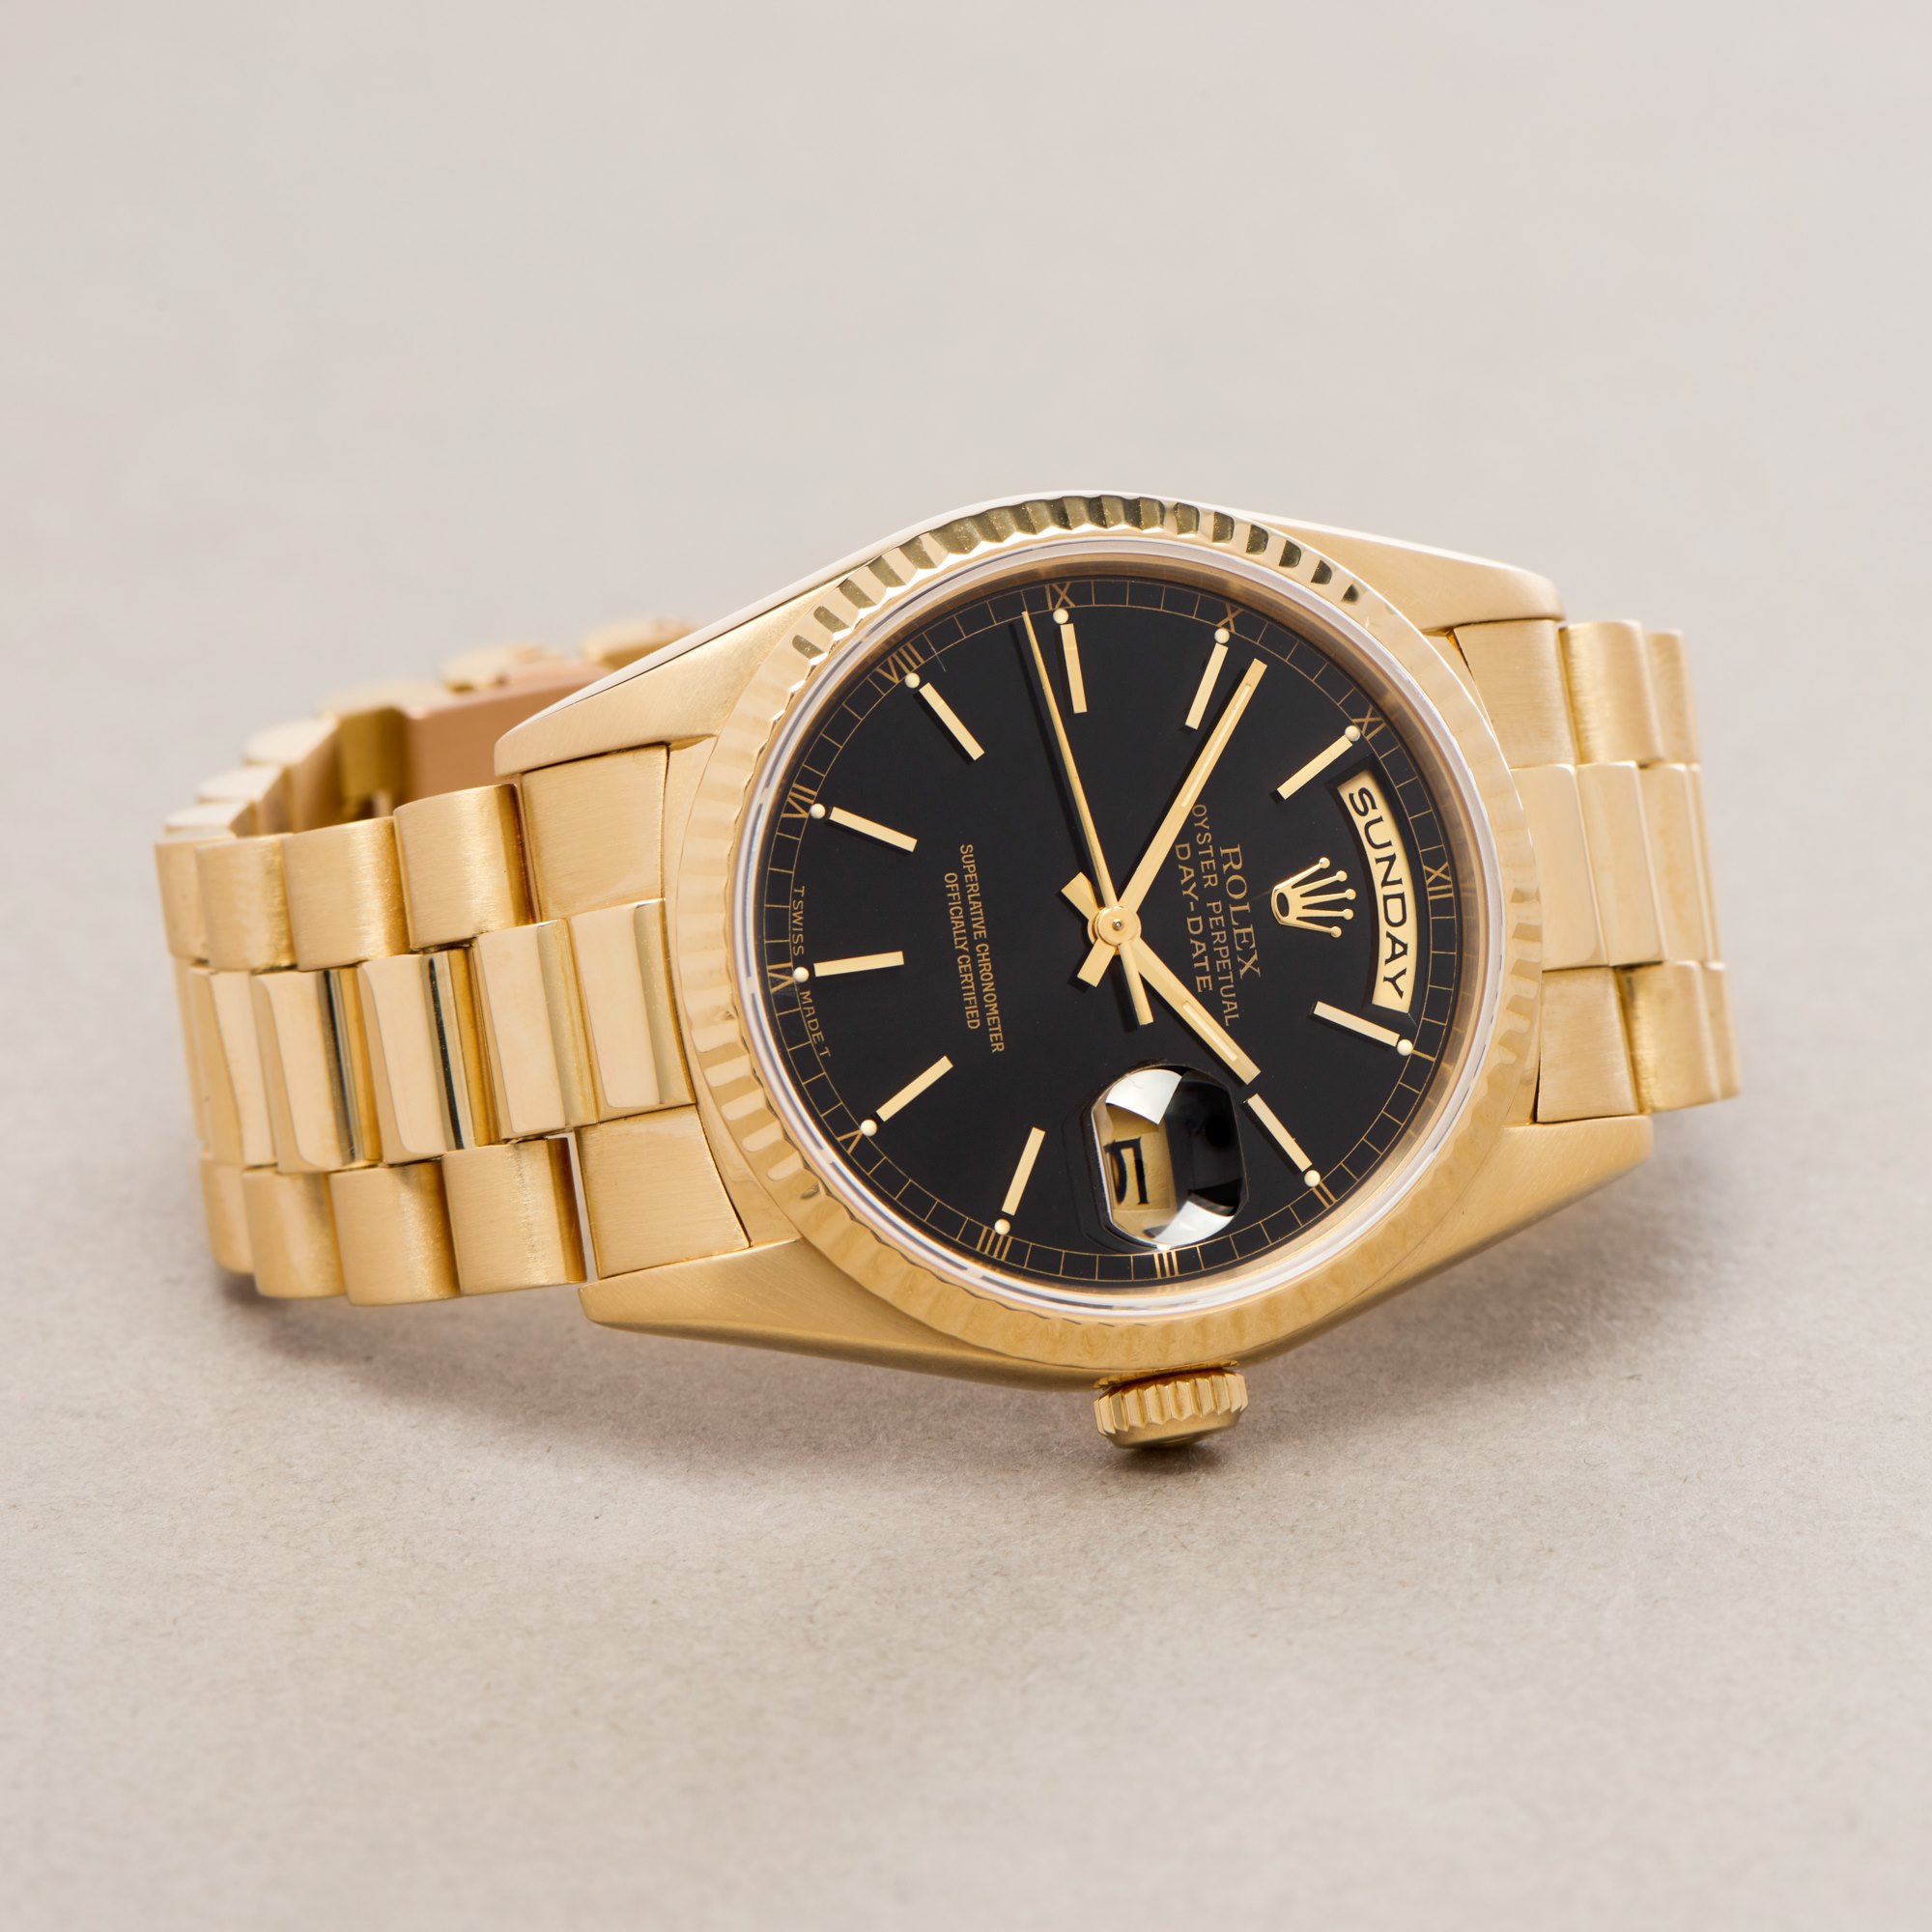 Rolex Day-Date 36 18K Yellow Gold 18238